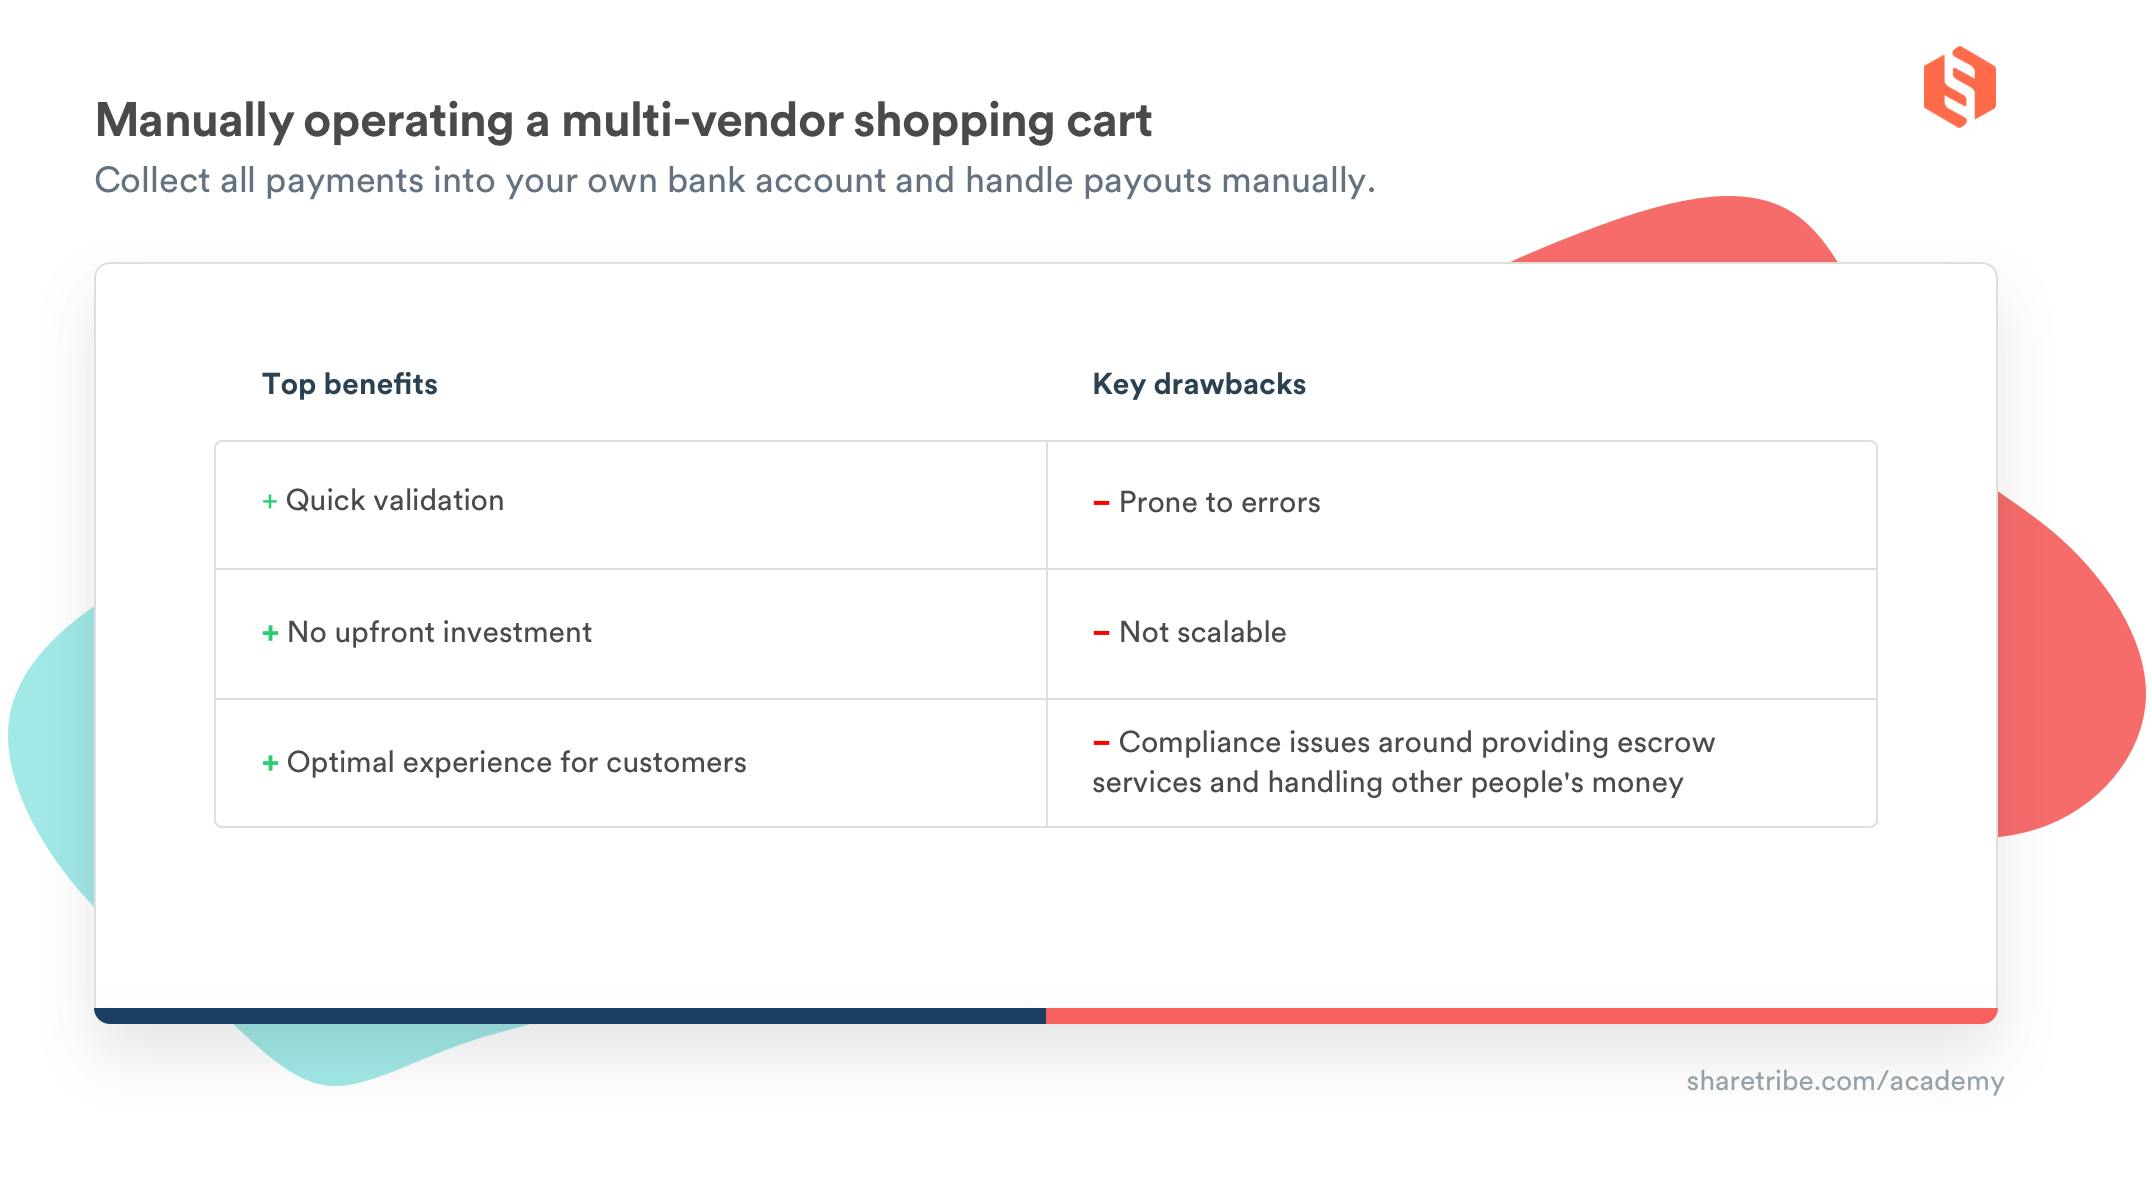 A table with the top benefits and key drawbacks of manually operating a multi-vendor shopping cart. Top benefits: quick validation, no upfront investment, optimal experience for customers. Key drawbacks: prone to errors, not scalable, compliance issues around providing escrow services and handling other people's money.